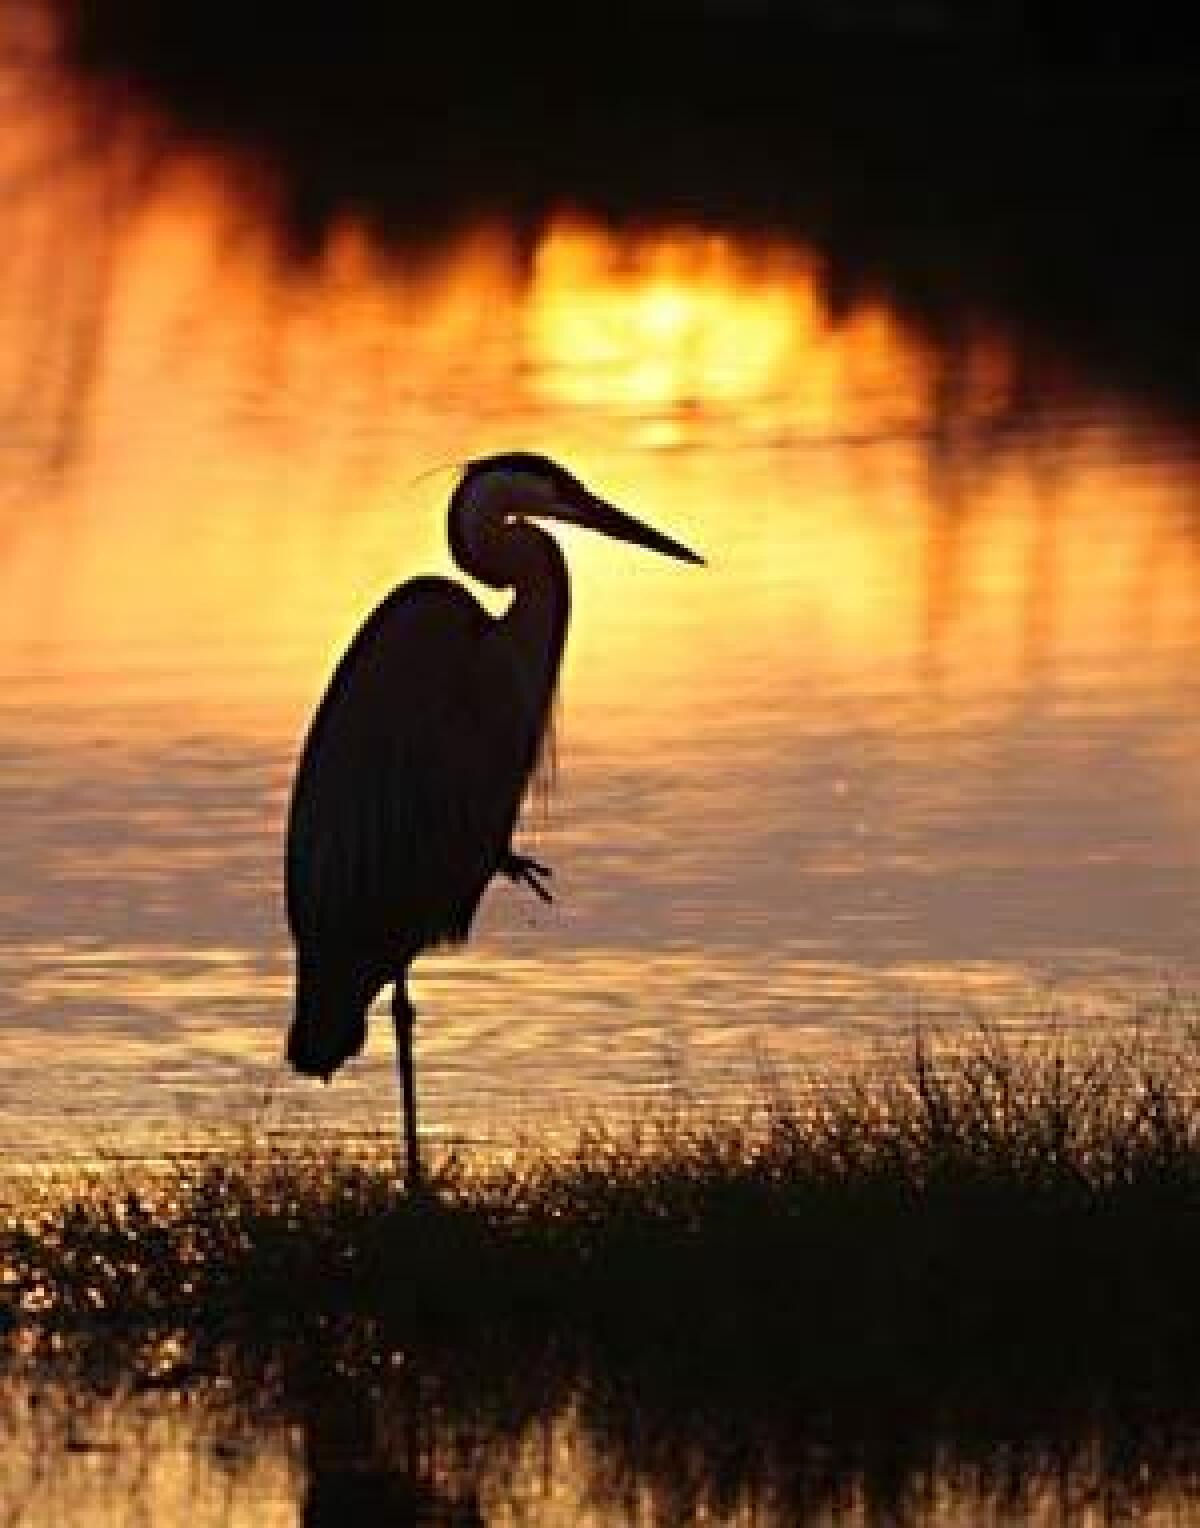 A blue heron stands in the water at Lake Shelby in Gulf Shores, Ala. The oil spill occurred just before the peak tourist season, hampering the region's usually bustling summer scene.